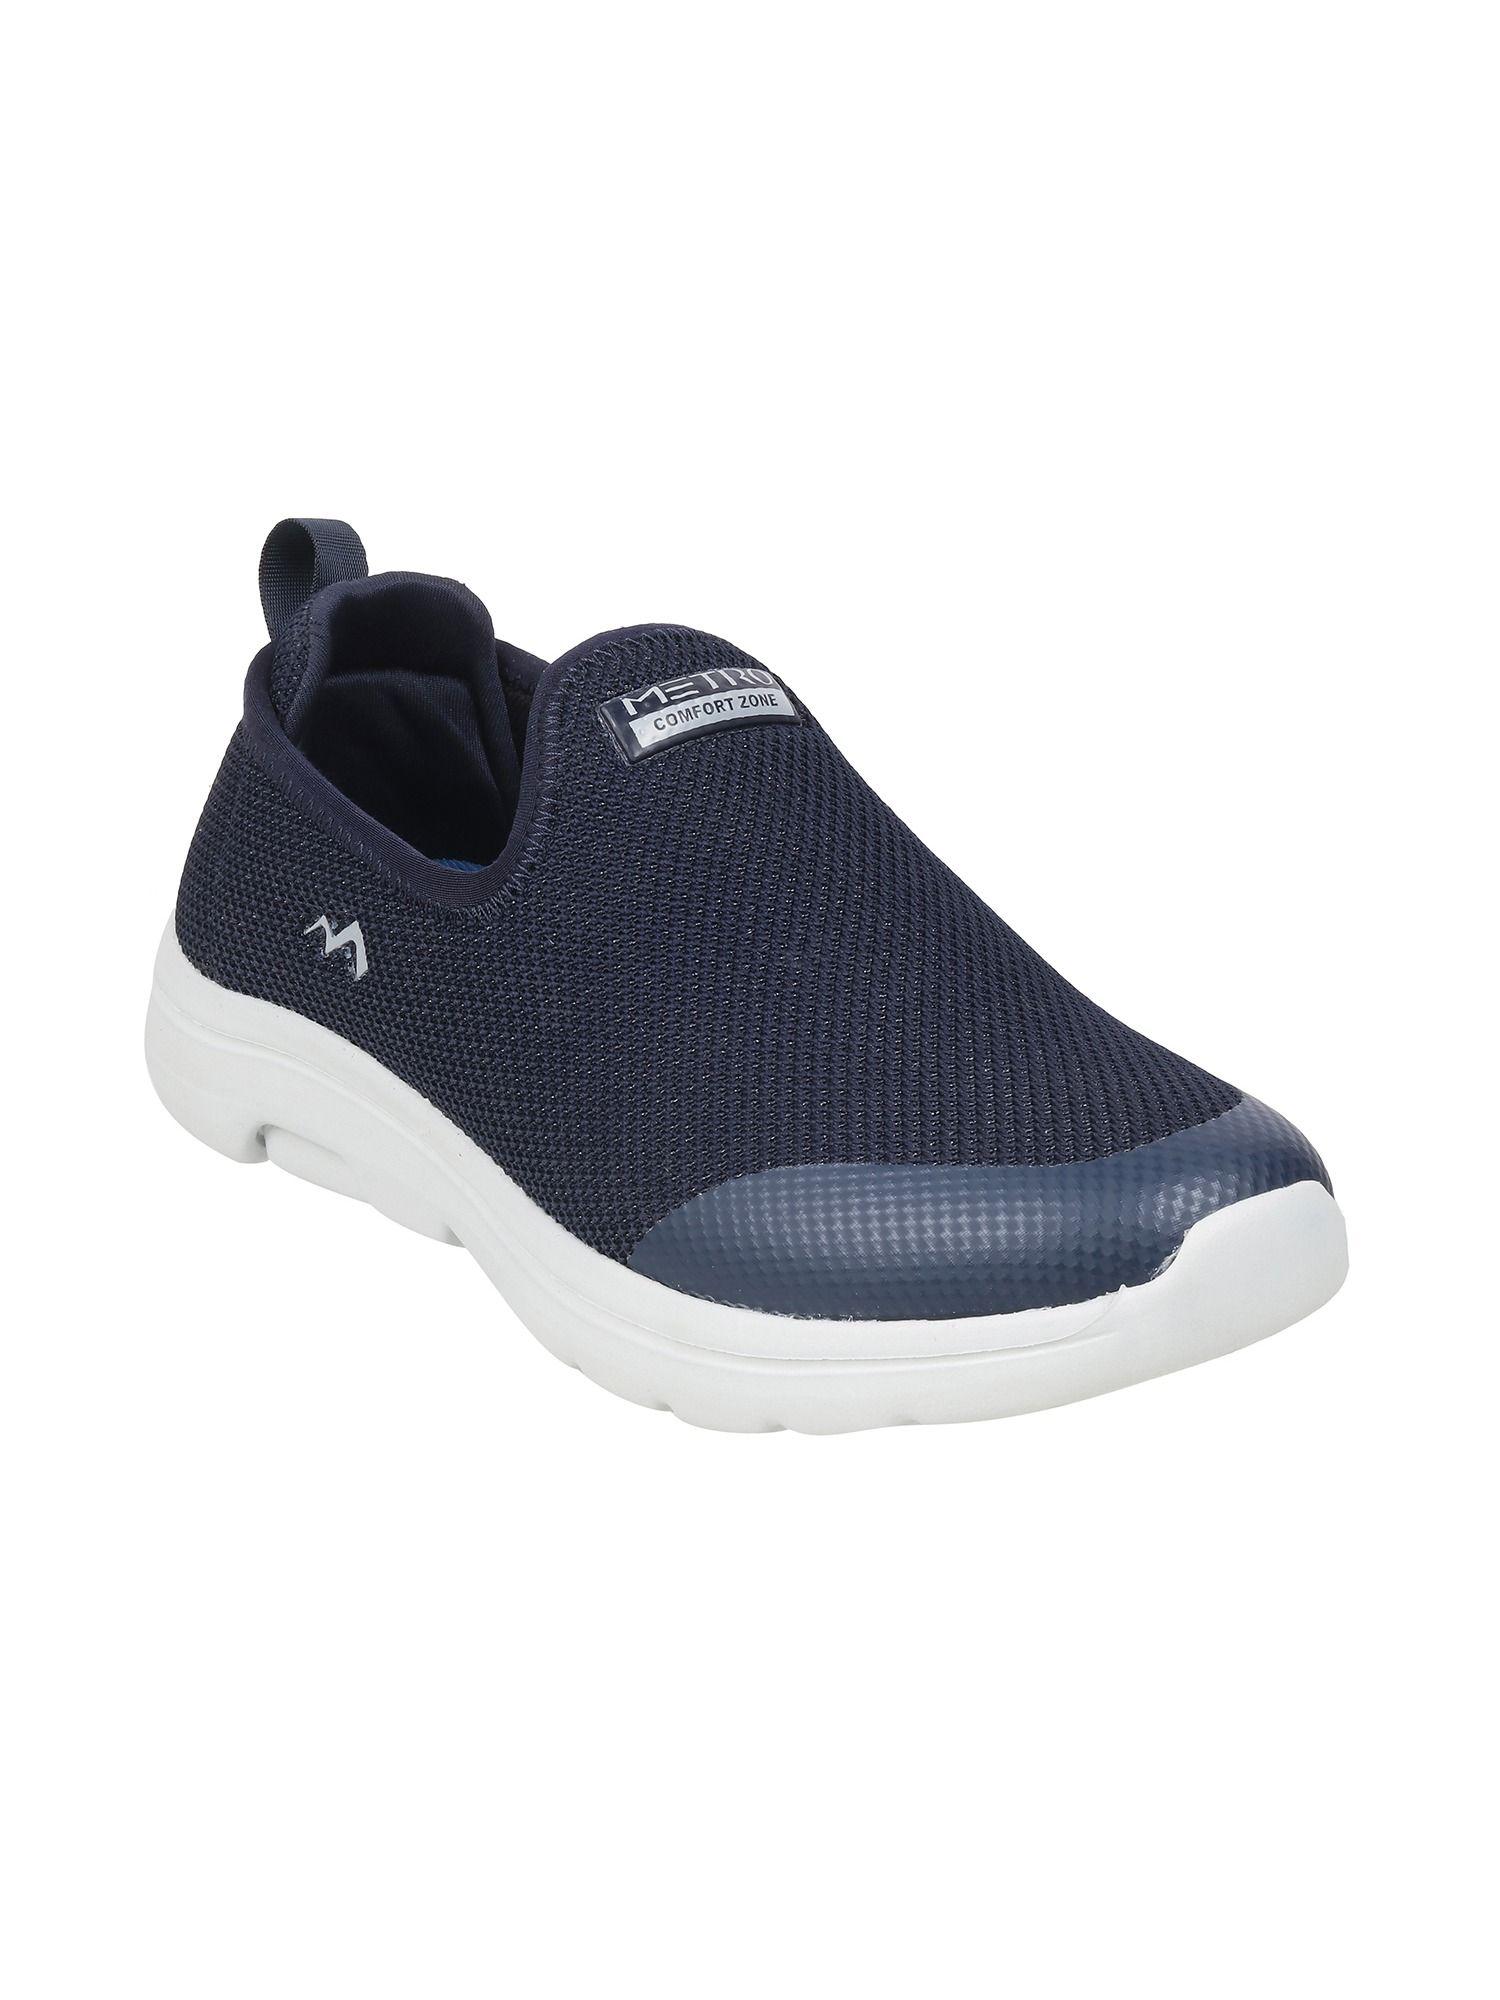 woven-blue-navy-sneakers